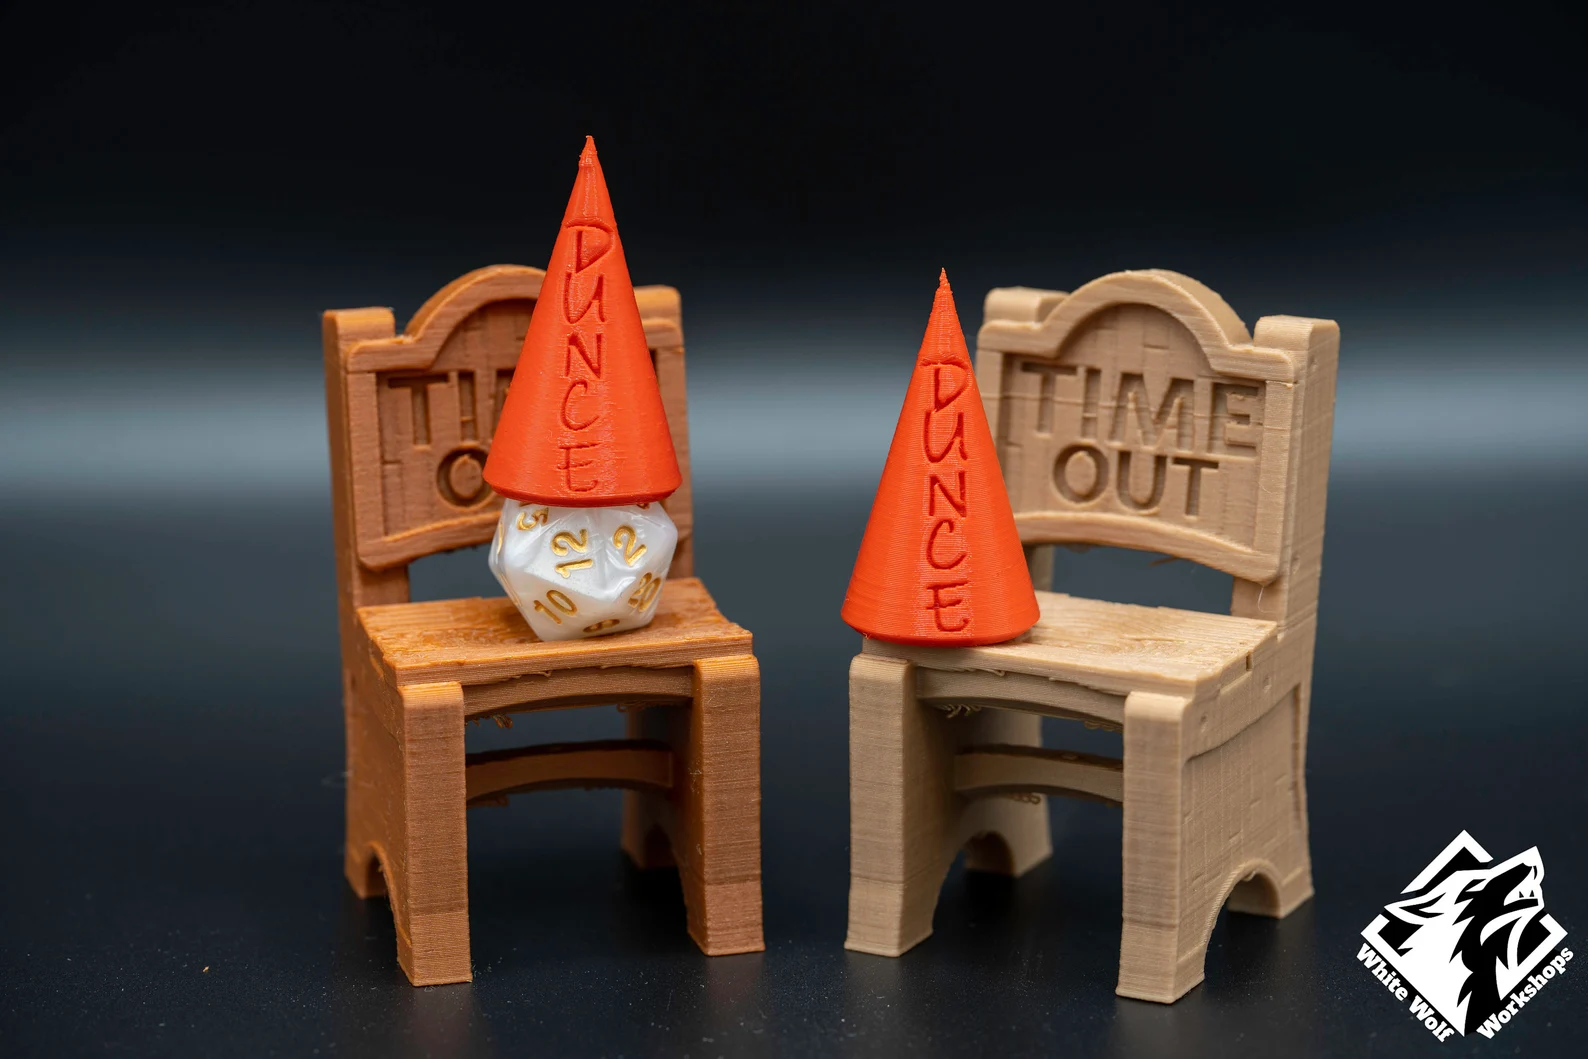 A photo of two small chairs with time out written horizontally on the backs of the chairs and orange conical hats resting on top. The hats have Dunce written vertically down the front. A white 20-sided dice wears the left hat and sits on top of the left chair. 